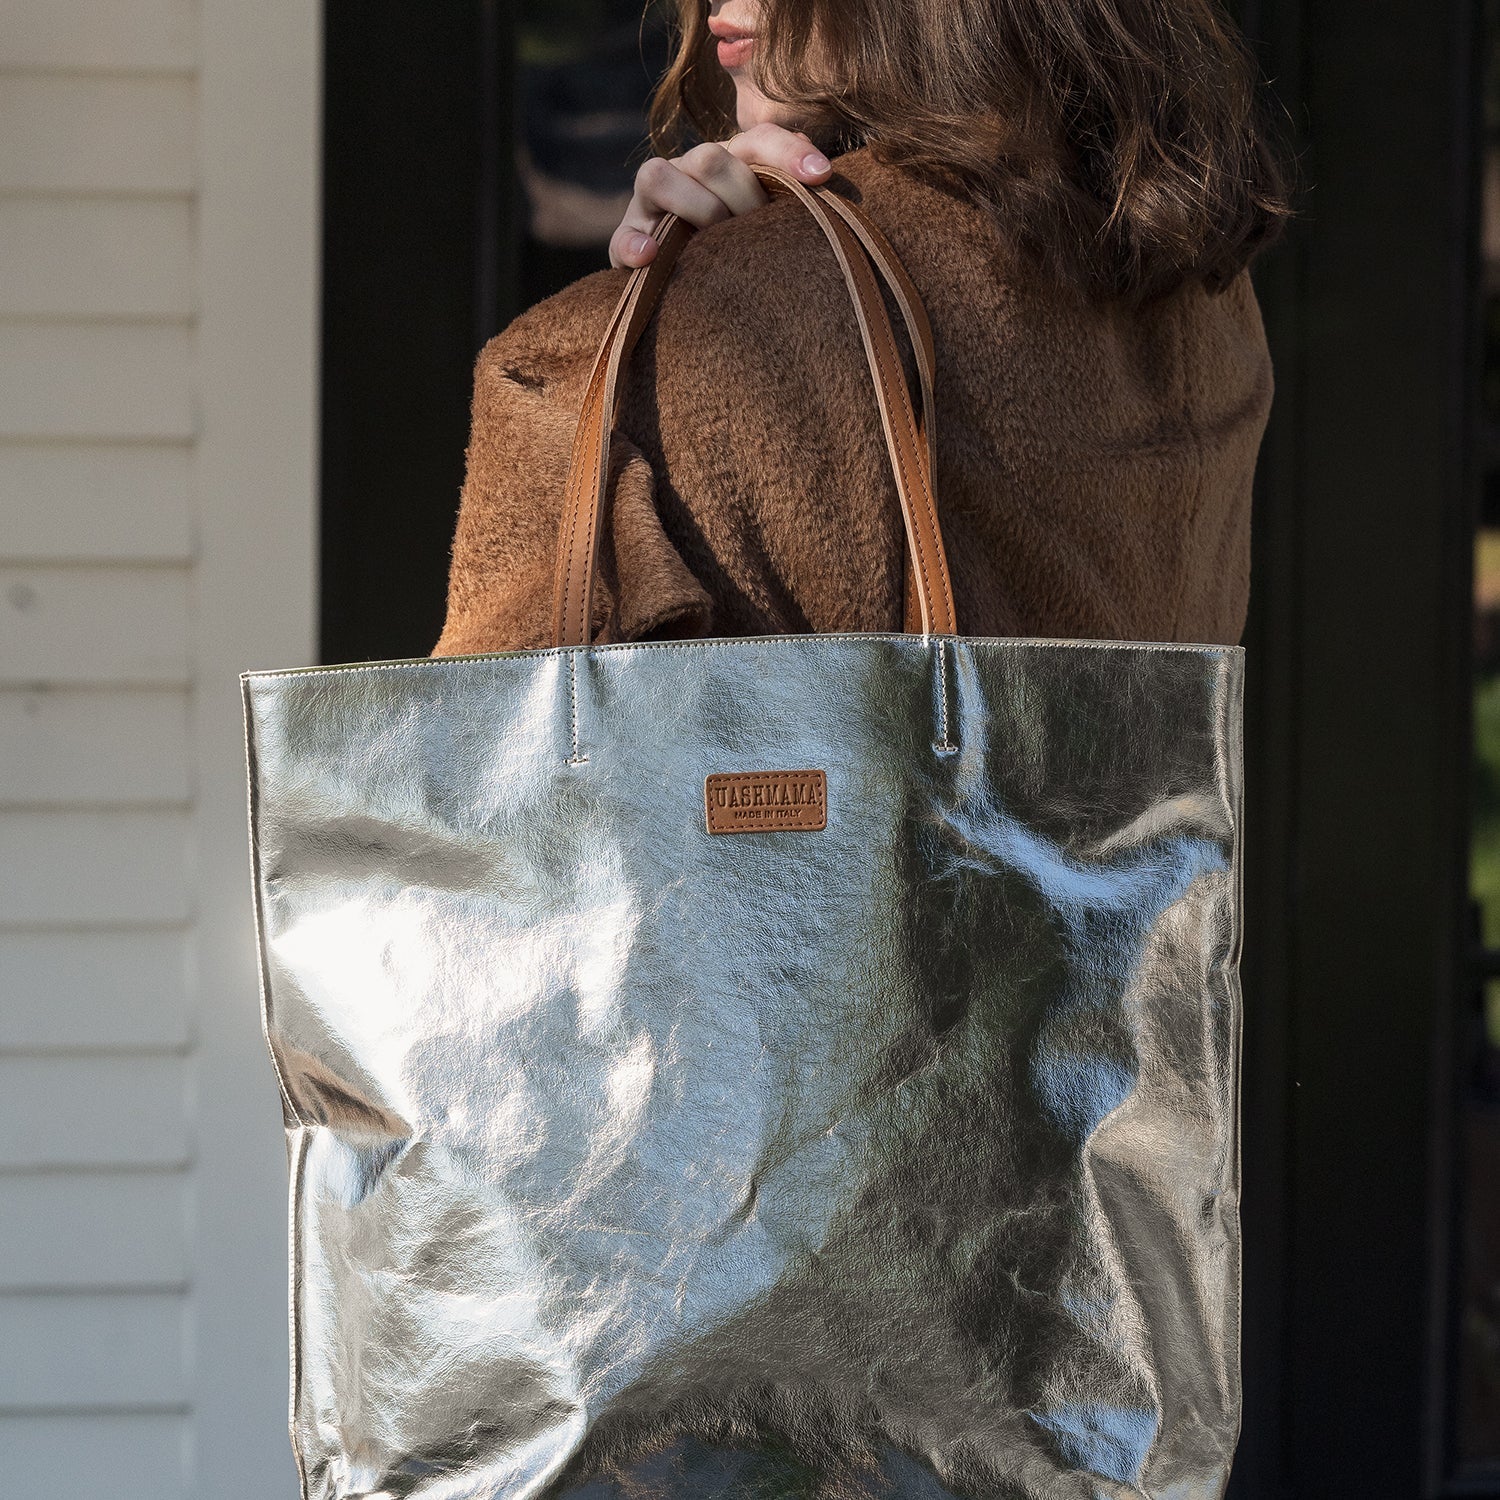 A woman is shown standing looking backwards over her shoulder. She is holding a platinum metallic washable paper tote bag in her right hand, draped over her left shoulder. The bag has two tan leather handles and a tan leather UASHMAMA logo label. 